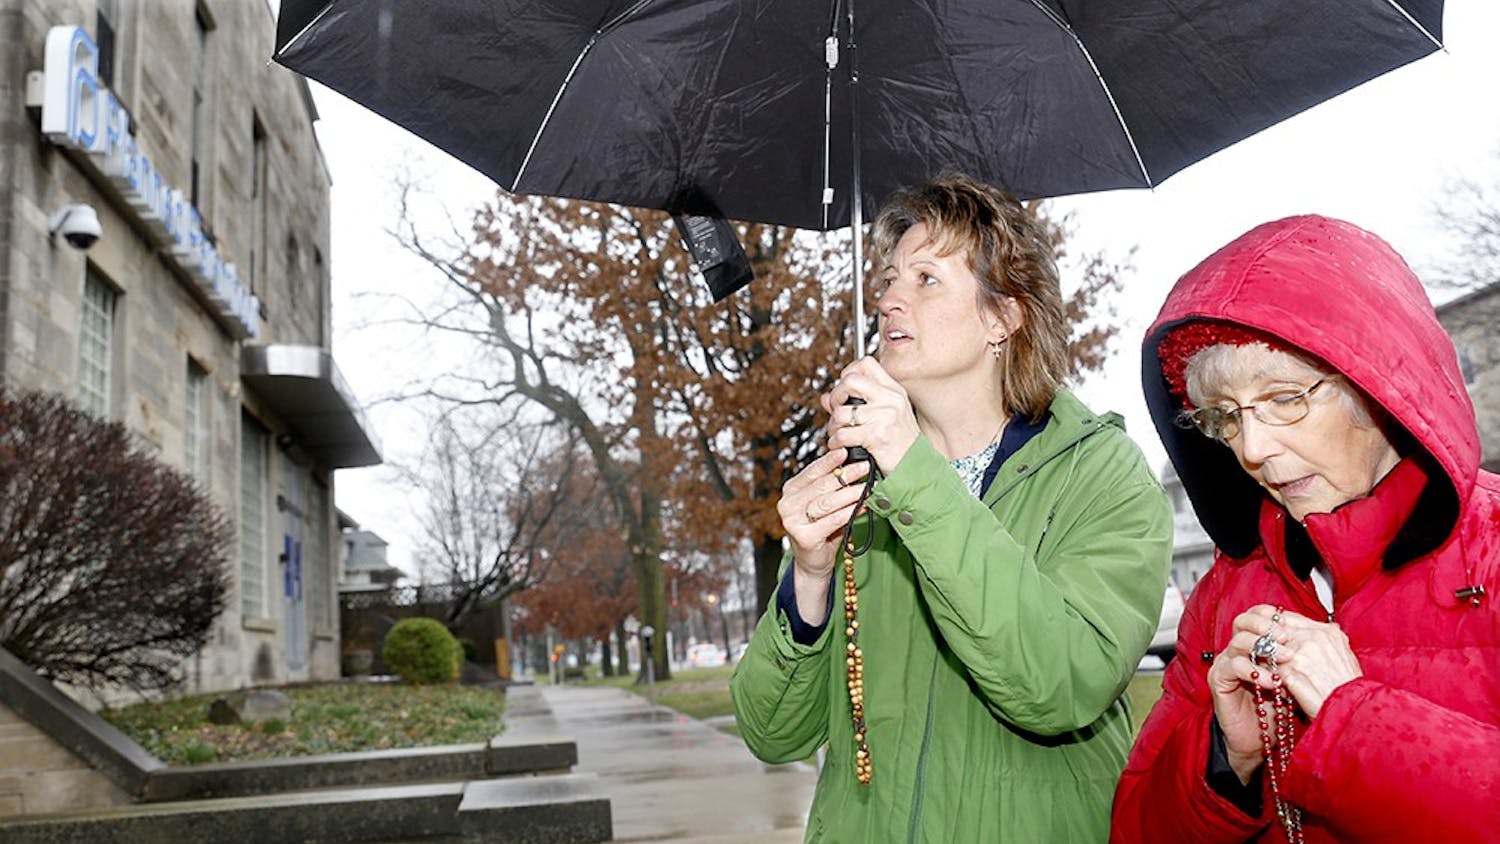 Brenda Preusz, left, and Barbara Dugan from Saint Bartholomew Catholic Church in Columbus, Ind. pray Thursday in front of Planned Parenthood. Prayers and protestors gather in front of the building every Thursday when abortion is proceeded. 